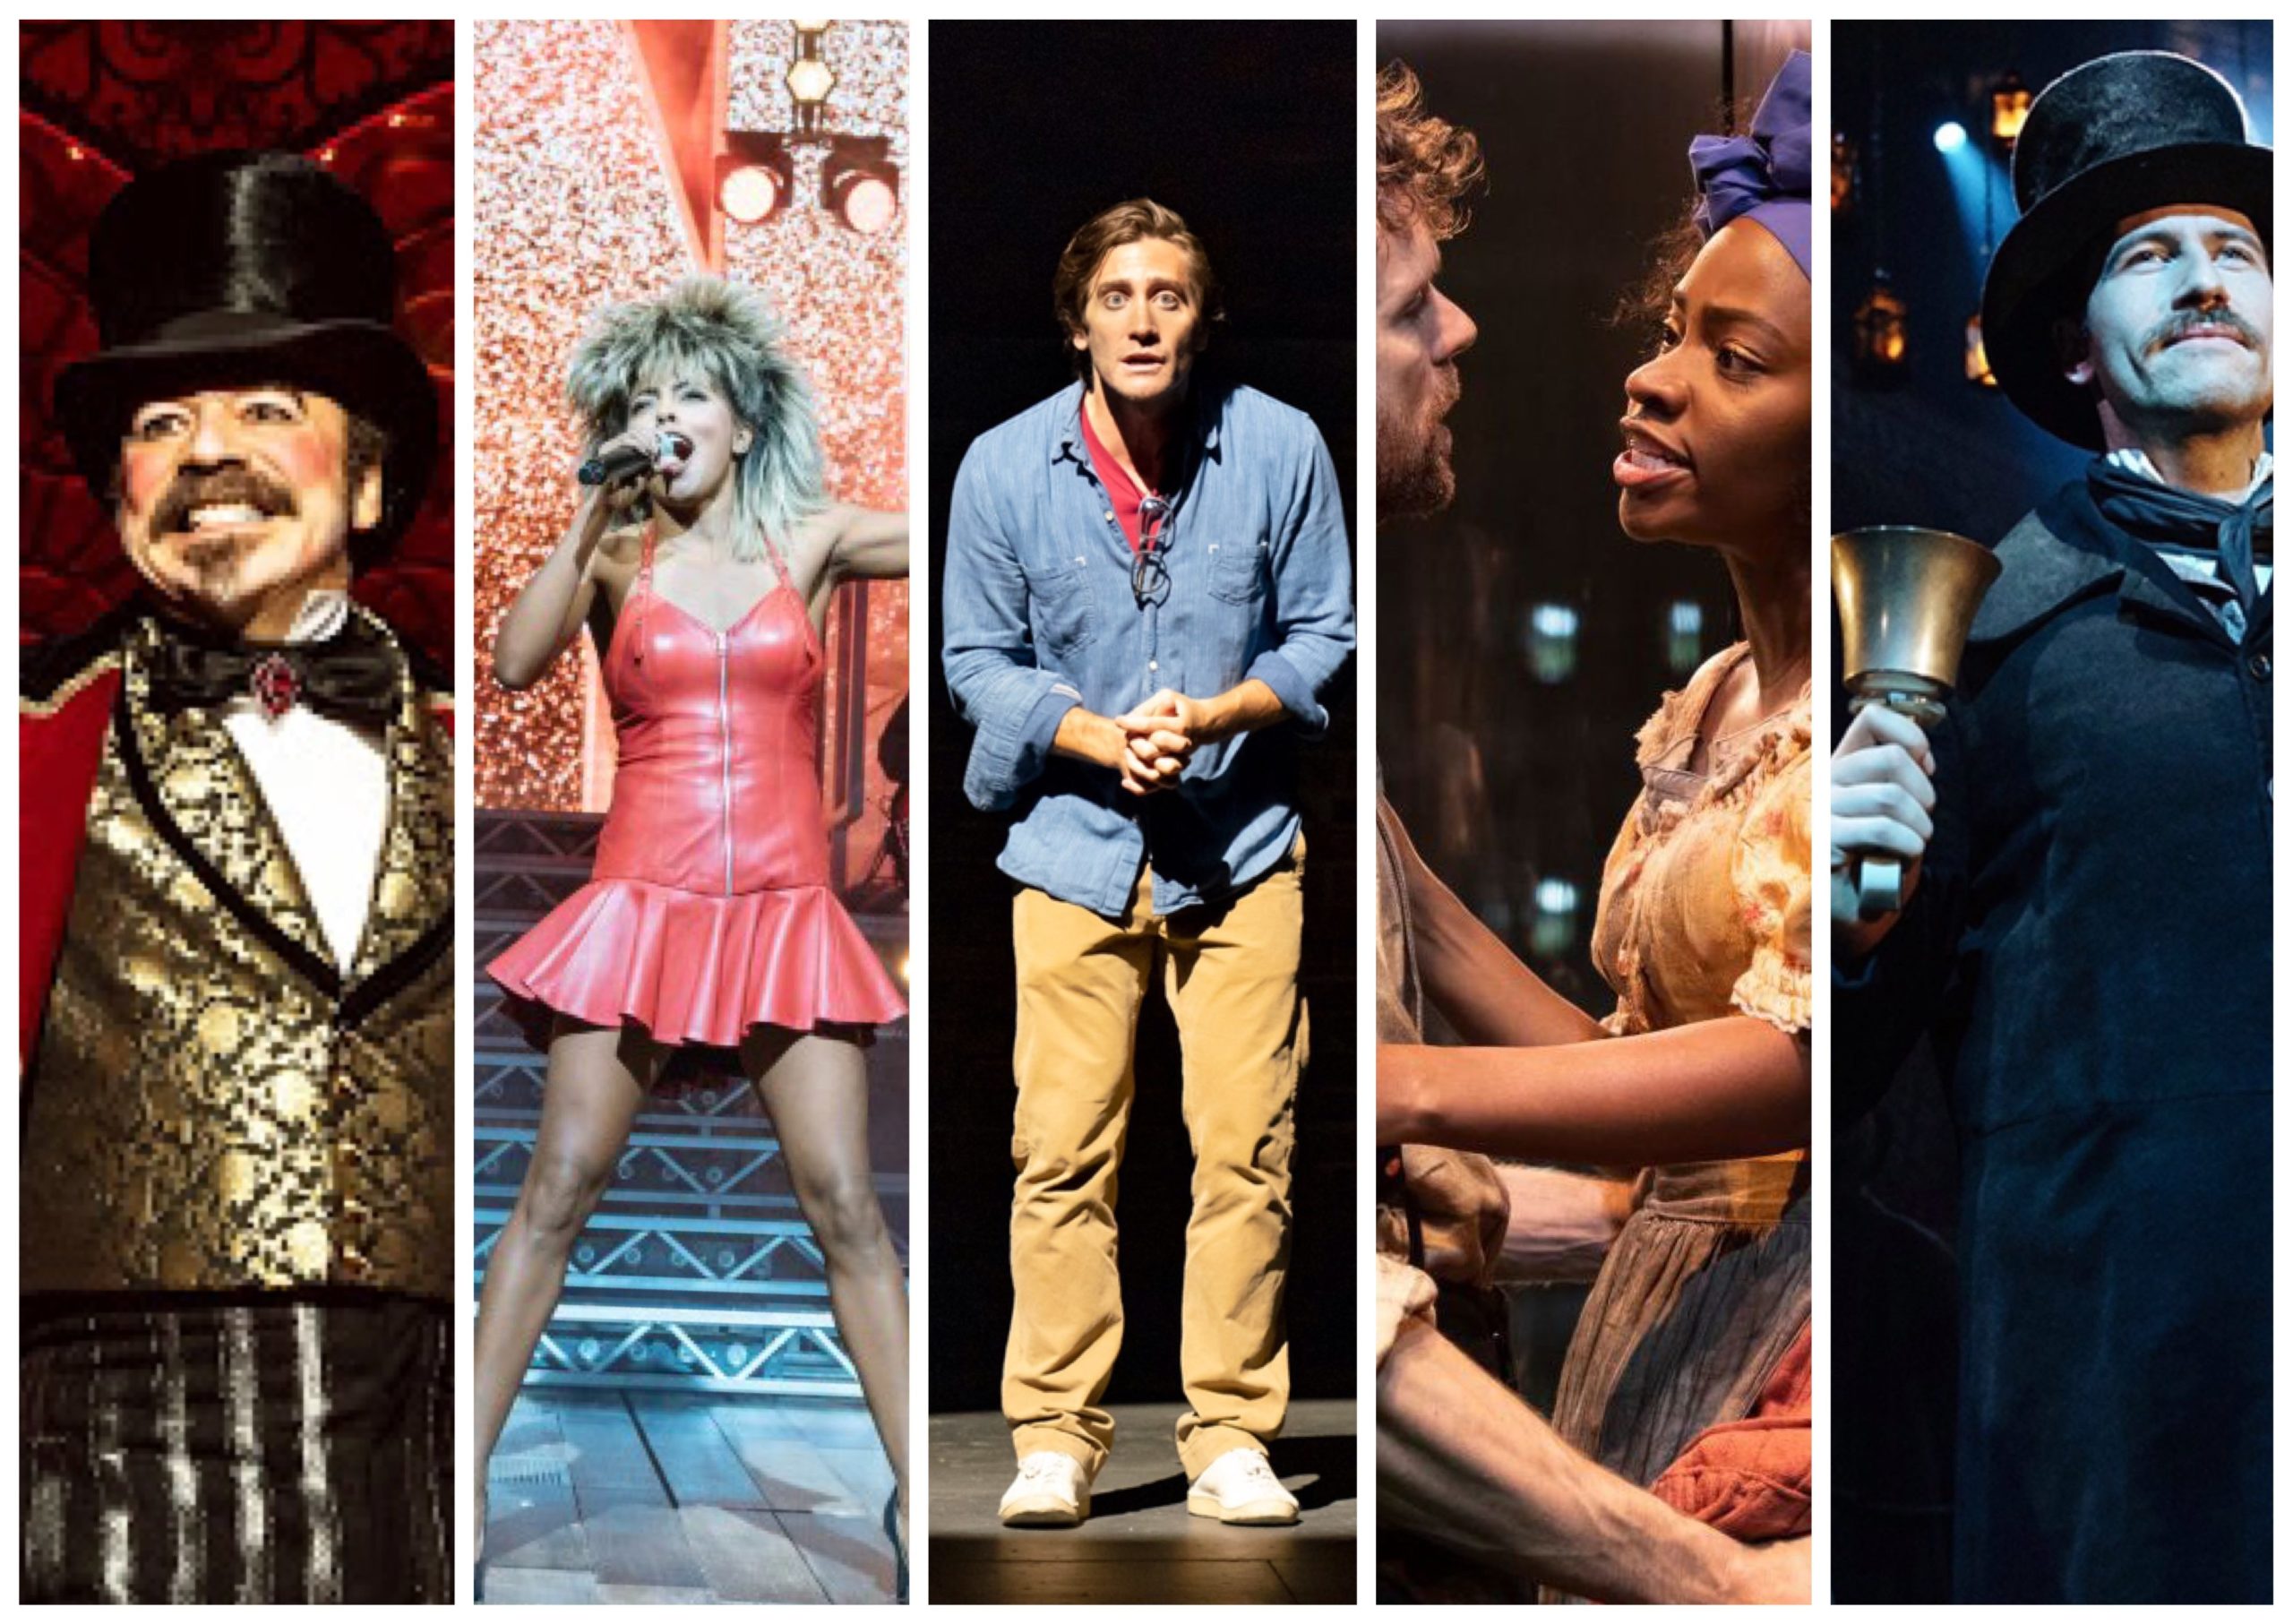 The 2020 Tony Awards nominees have just been announced!